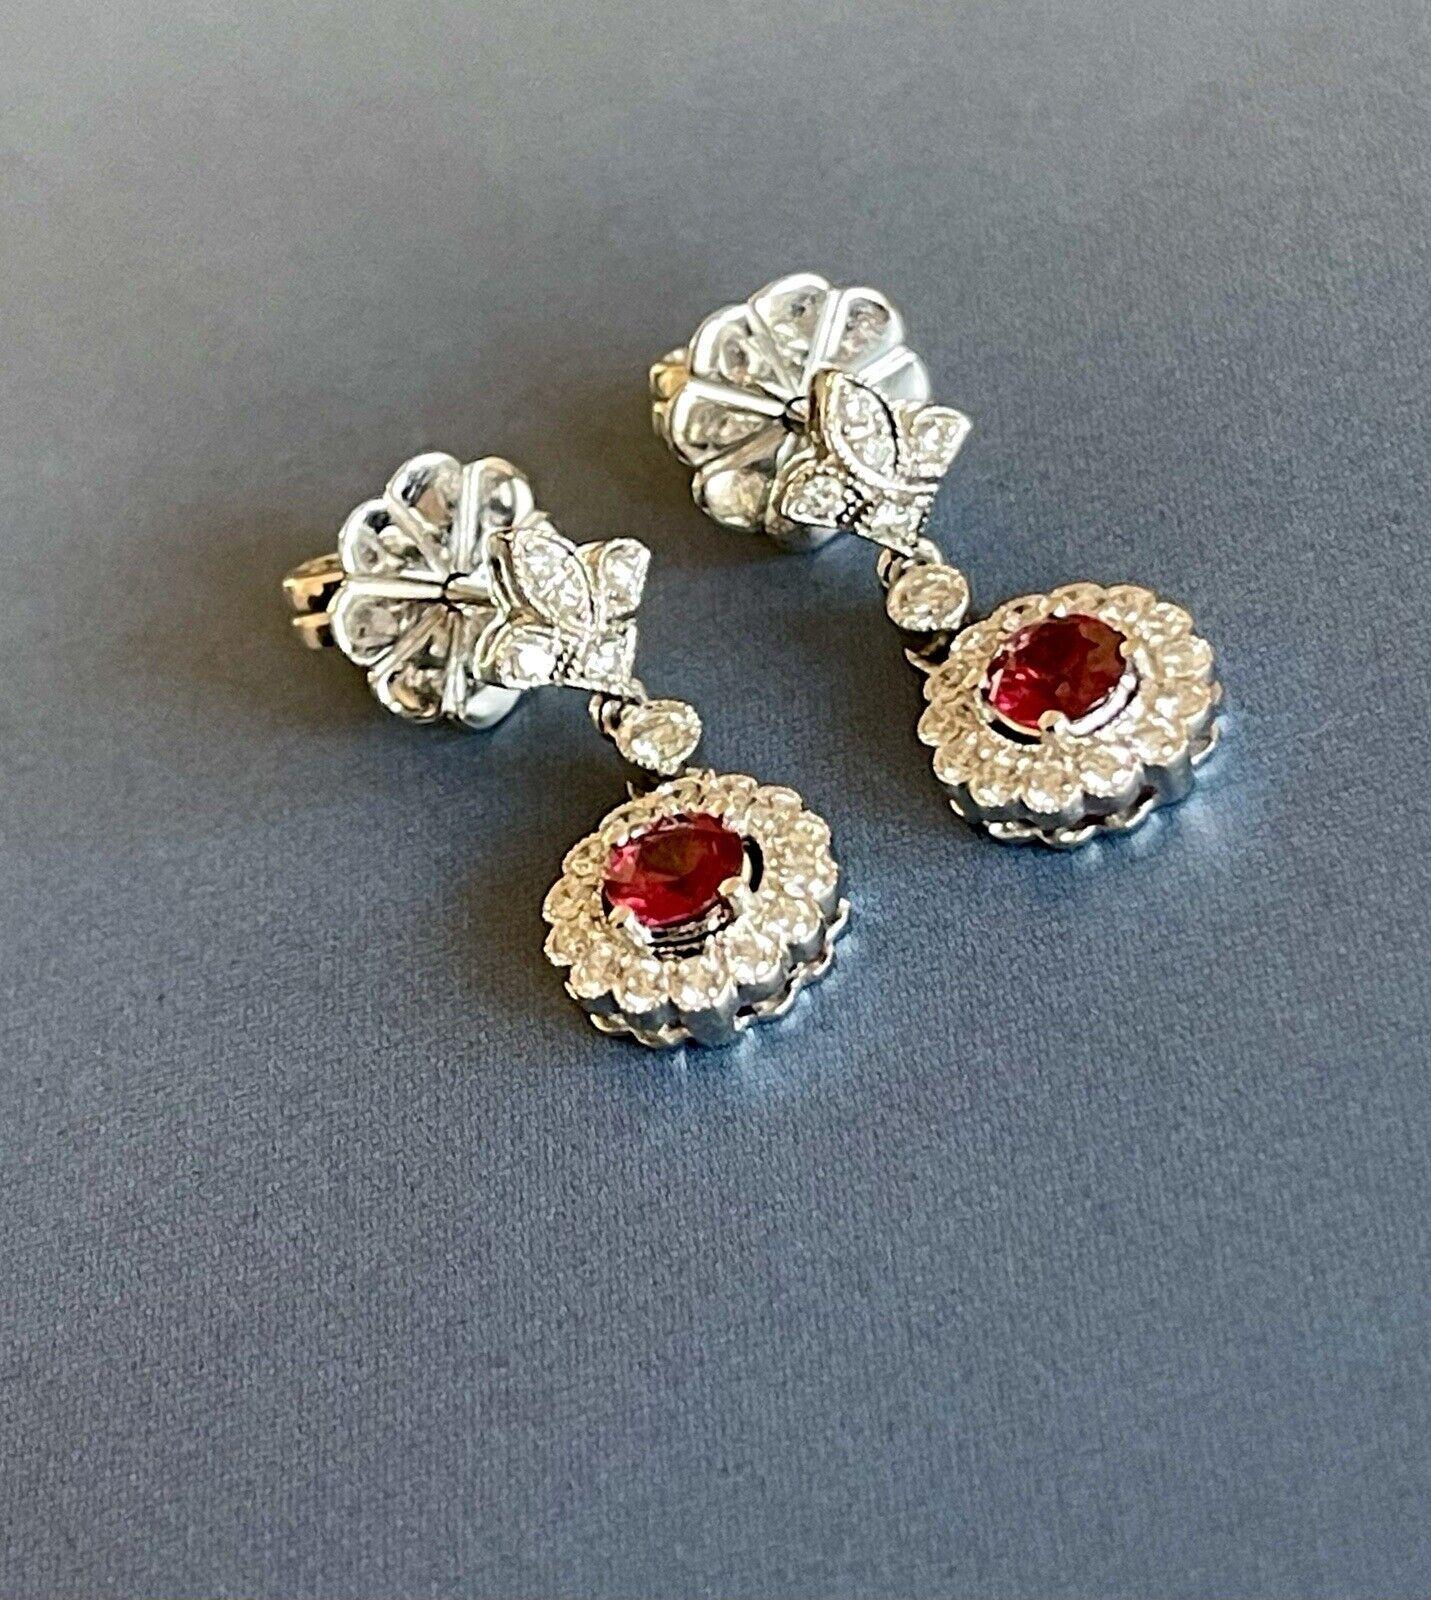 18ct White Gold Diamond Ruby Earrings Round Halo Drop Studs Milgrain In New Condition For Sale In Ilford, GB